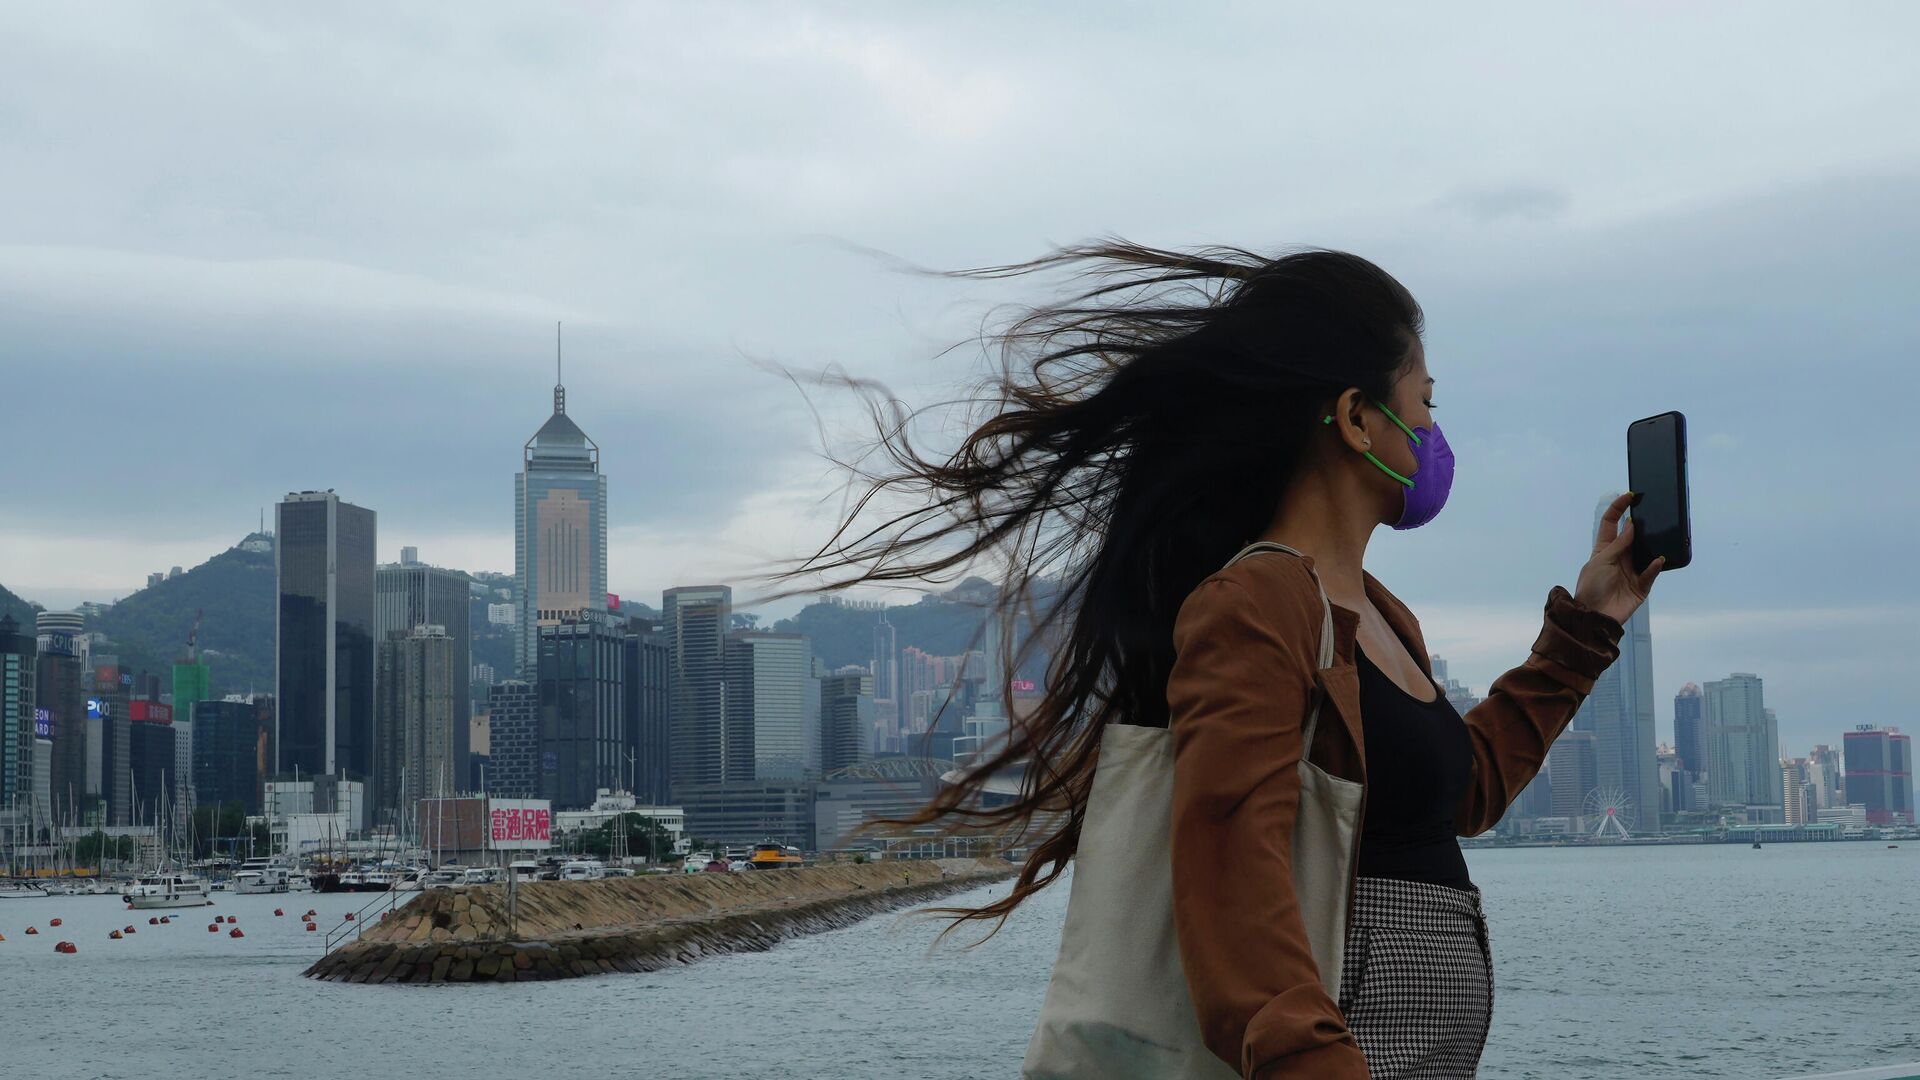 A woman poses for a selfie at the waterfront of Victoria Habour in strong winds while a typhoon approaches Hong Kong Tuesday, Oct. 12, 2021. The Hong Kong Observatory said it will consider issuing the number 8 signal between 4pm and 6pm on Tuesday as Severe Tropical Storm Kompasu edges closer to the city. - Sputnik International, 1920, 13.10.2021